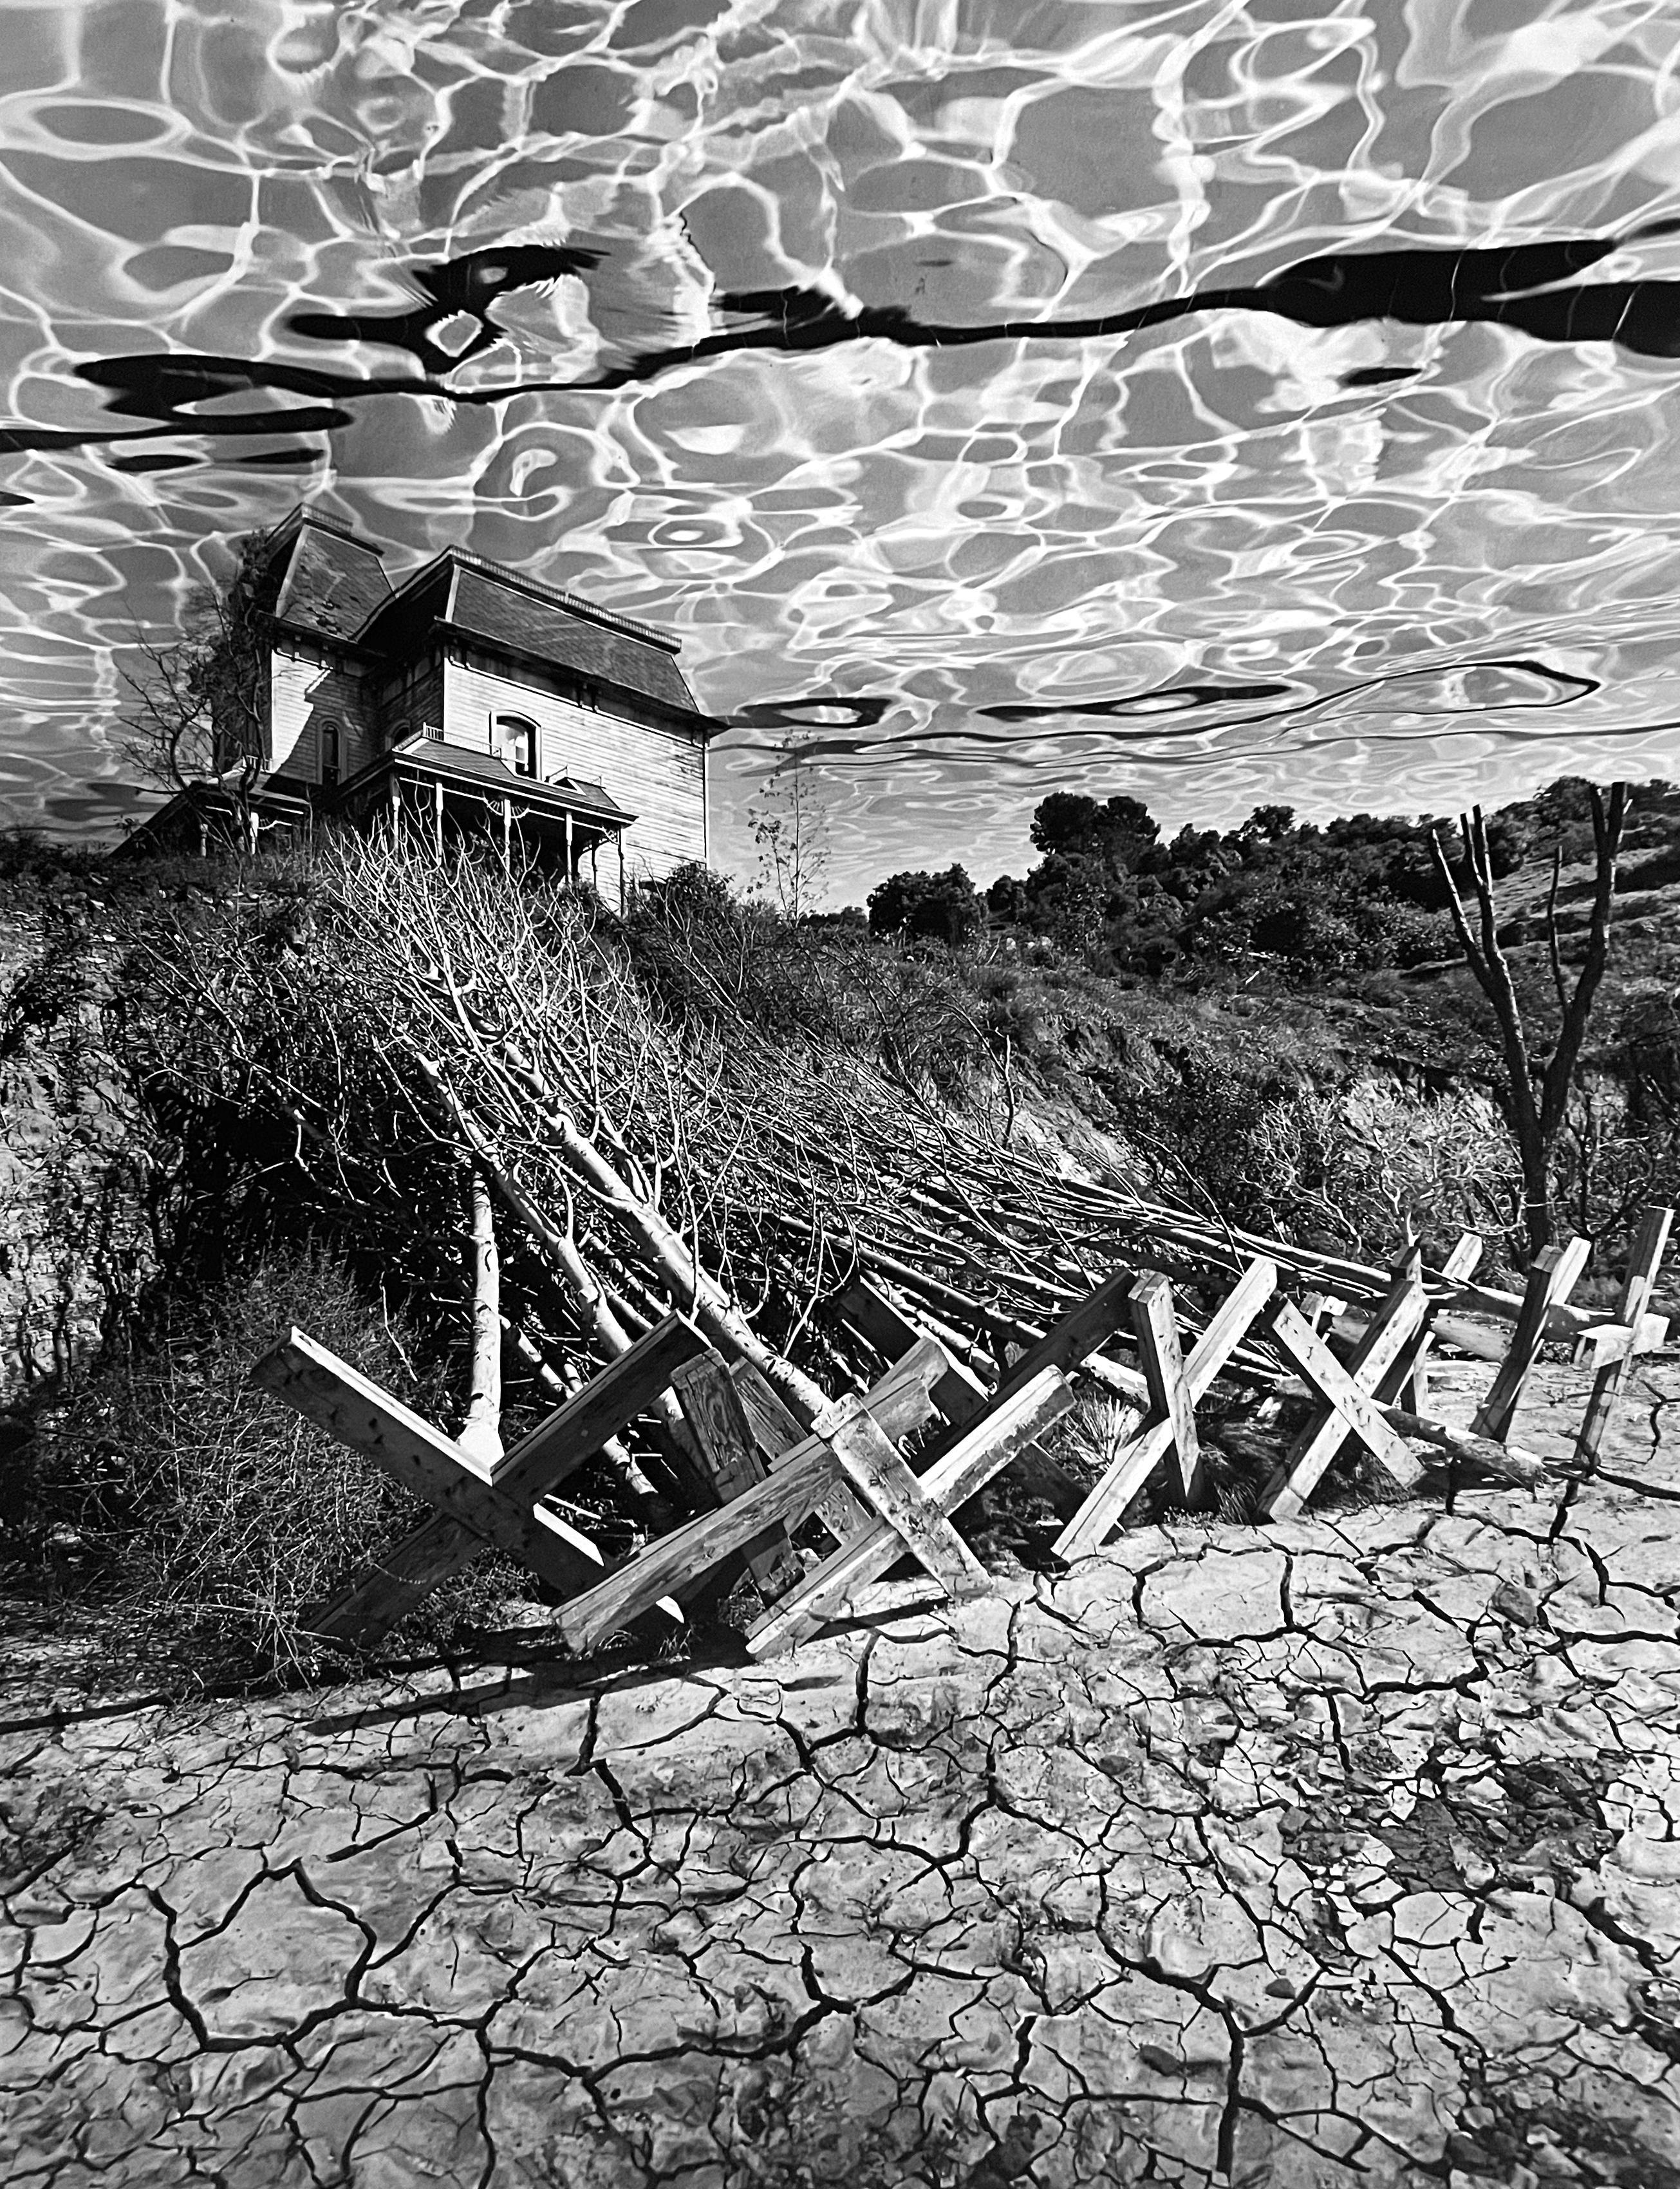 Jerry Uelsmann Black and White Photograph - Psycho House, 1978